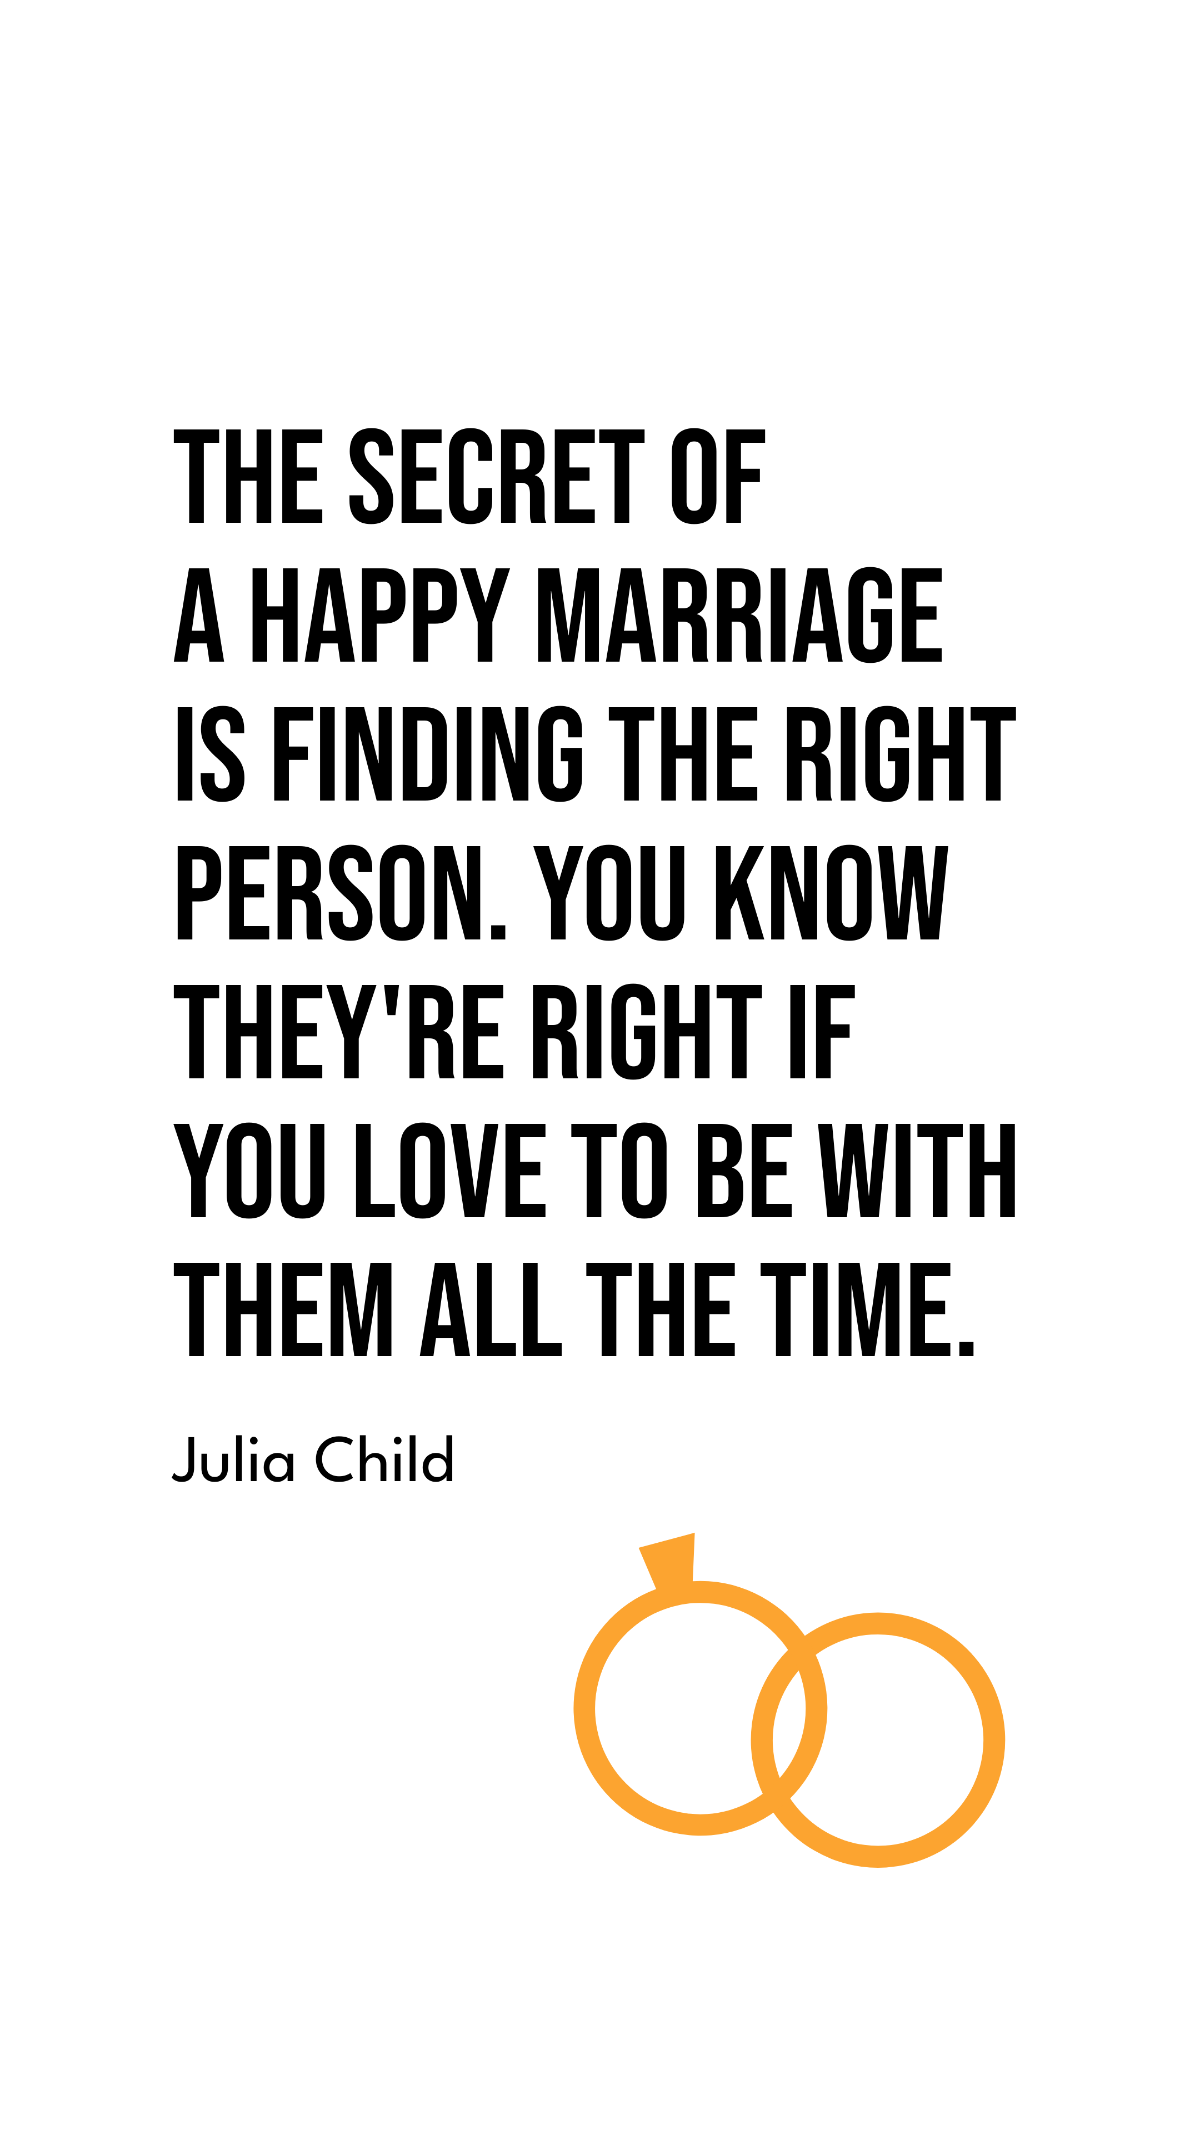 Julia Child - The secret of a happy marriage is finding the right person. You know they're right if you love to be with them all the time. Template